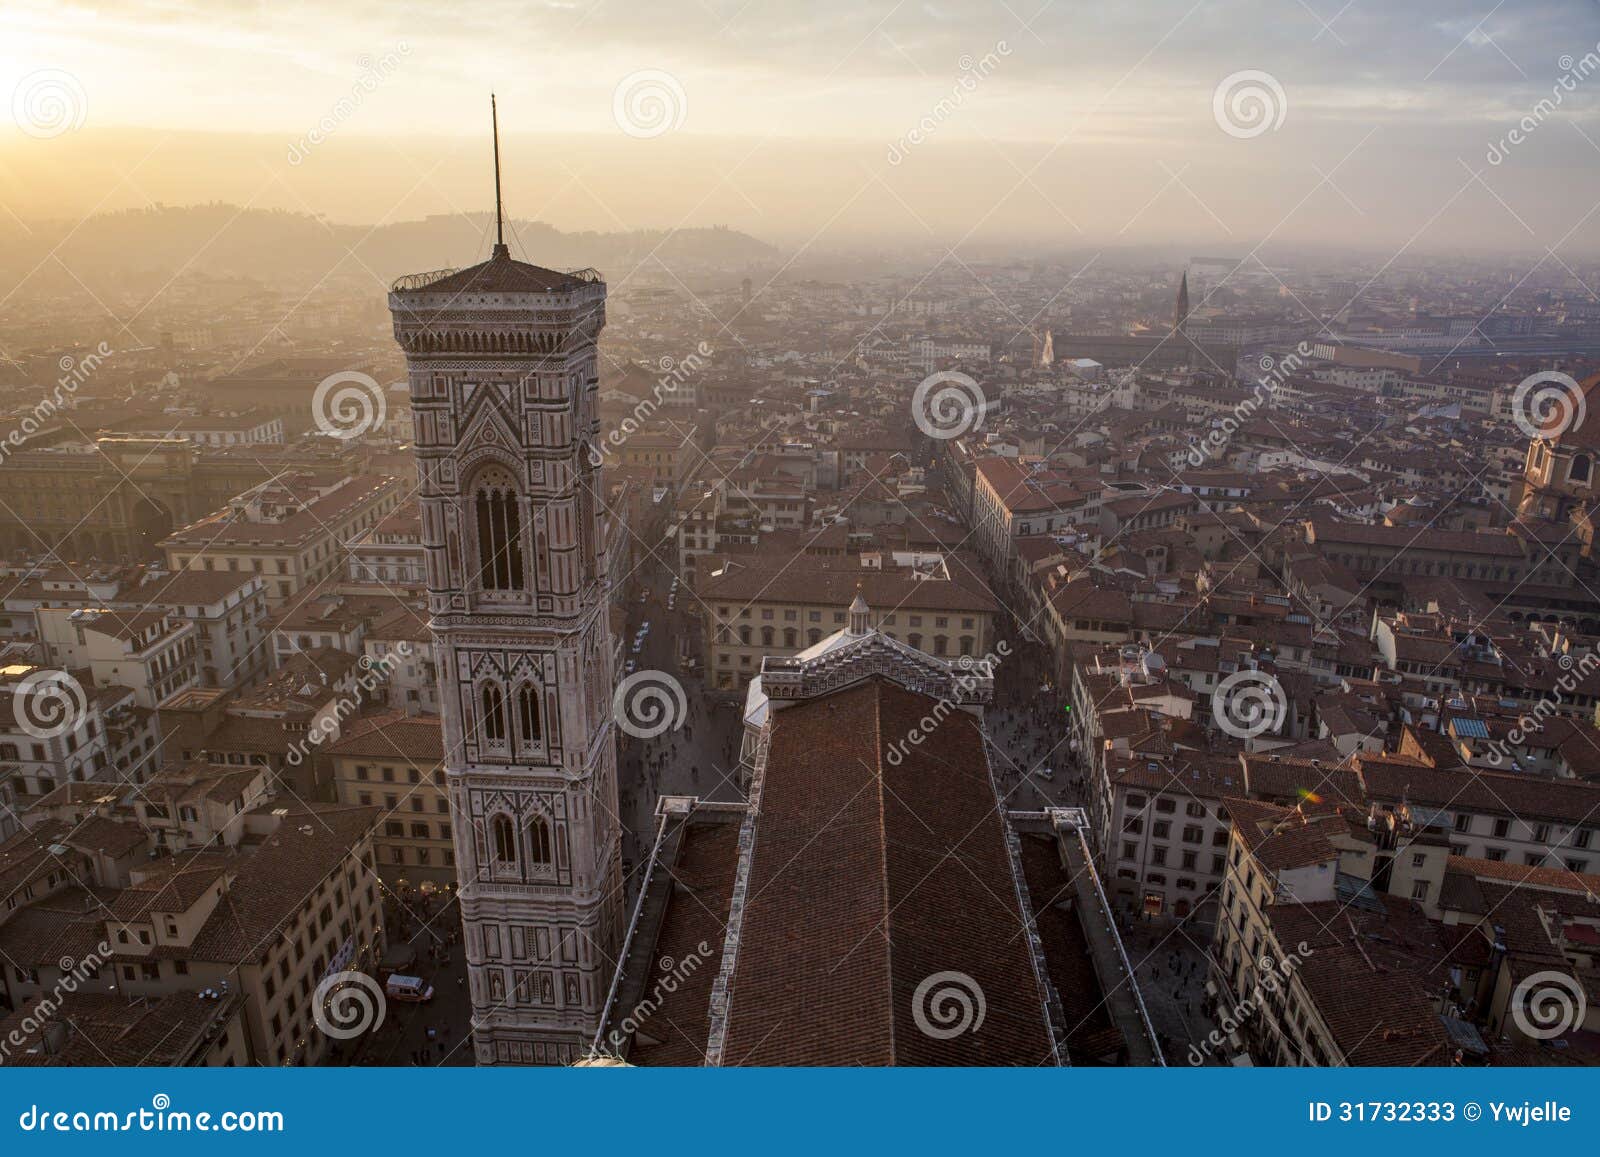 campanile tower, florence italy